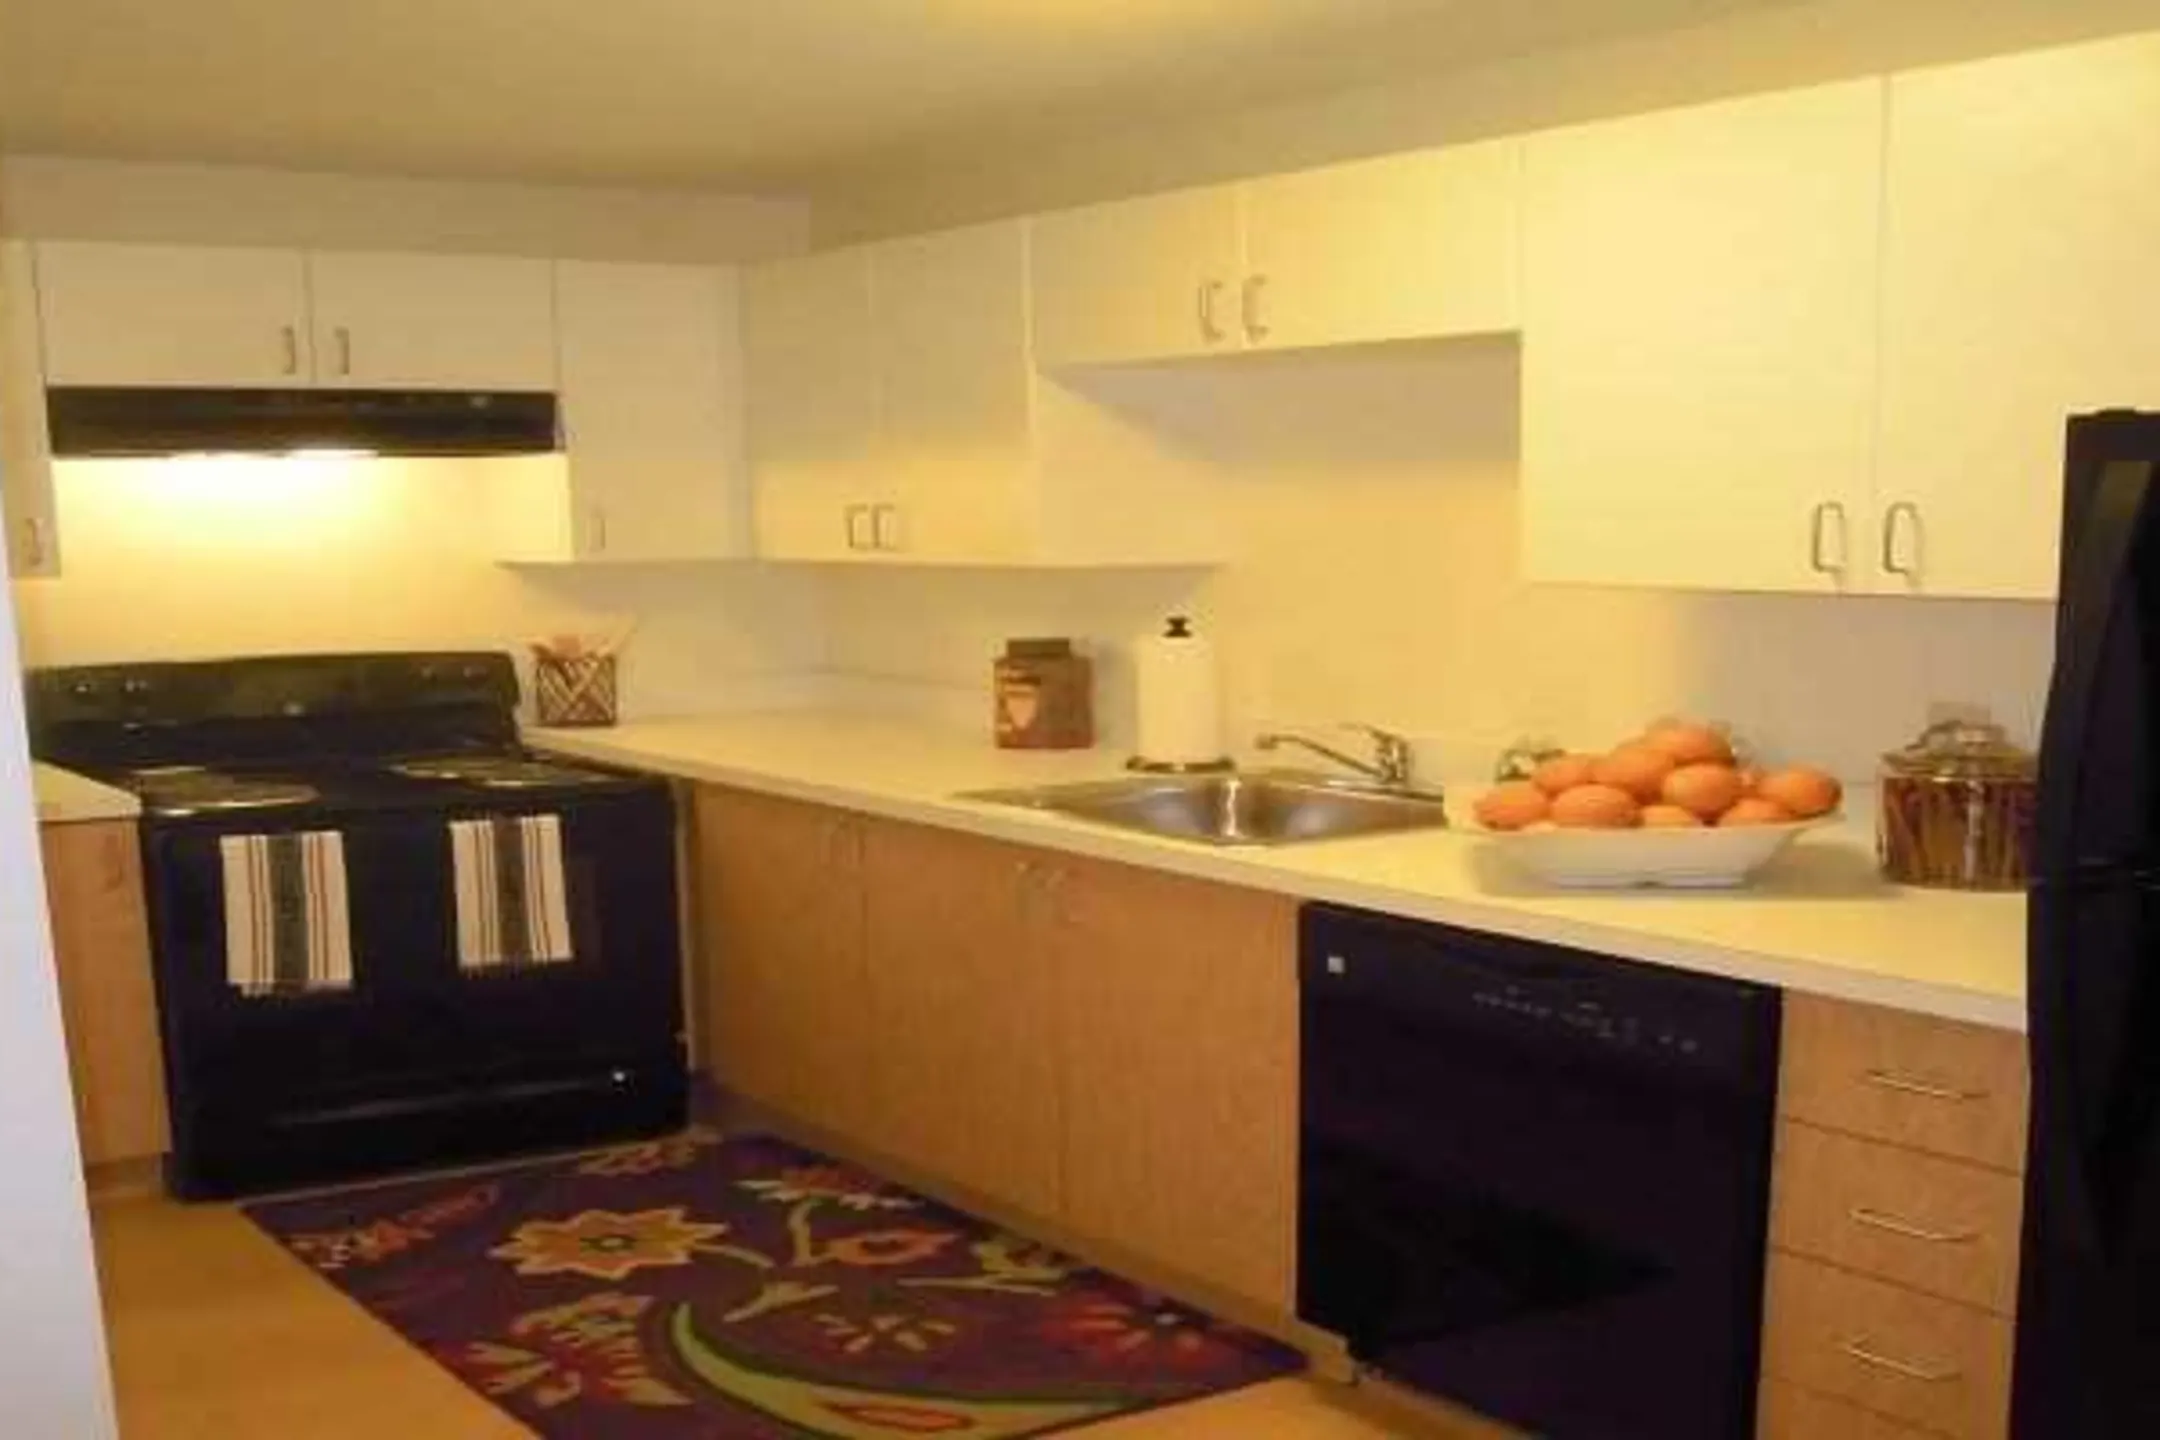 Kitchen - Copper Beech Commons - Per Bed Lease - Syracuse, NY